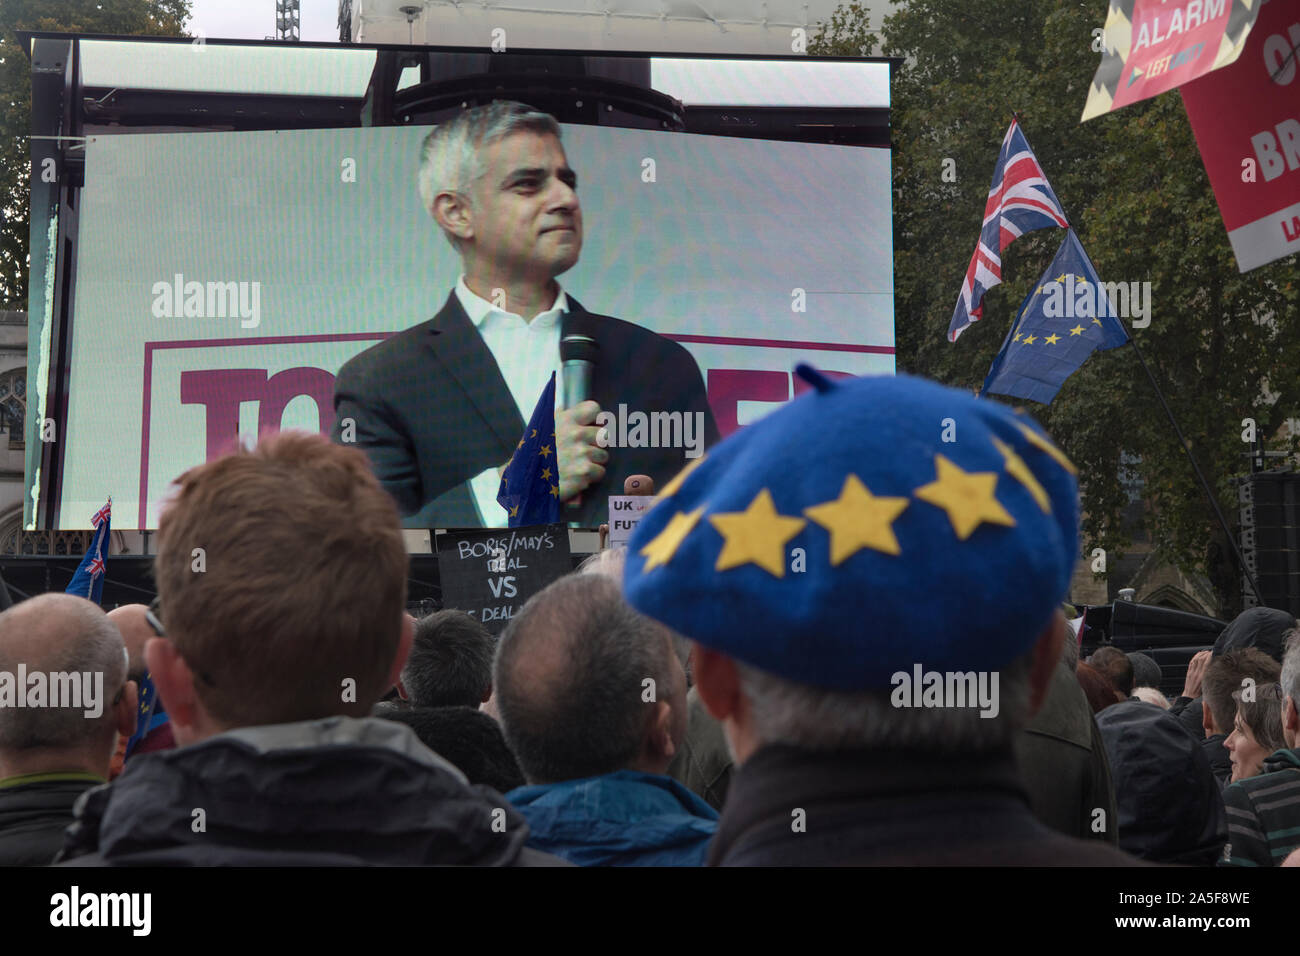 Sadiq Khan the Mayor of London attends the Peoples Vote Campaign demonstration TV screen screen in Parliament Square. Brexit Super Saturday 19 October 2019  London UK. HOMER SYKES Stock Photo